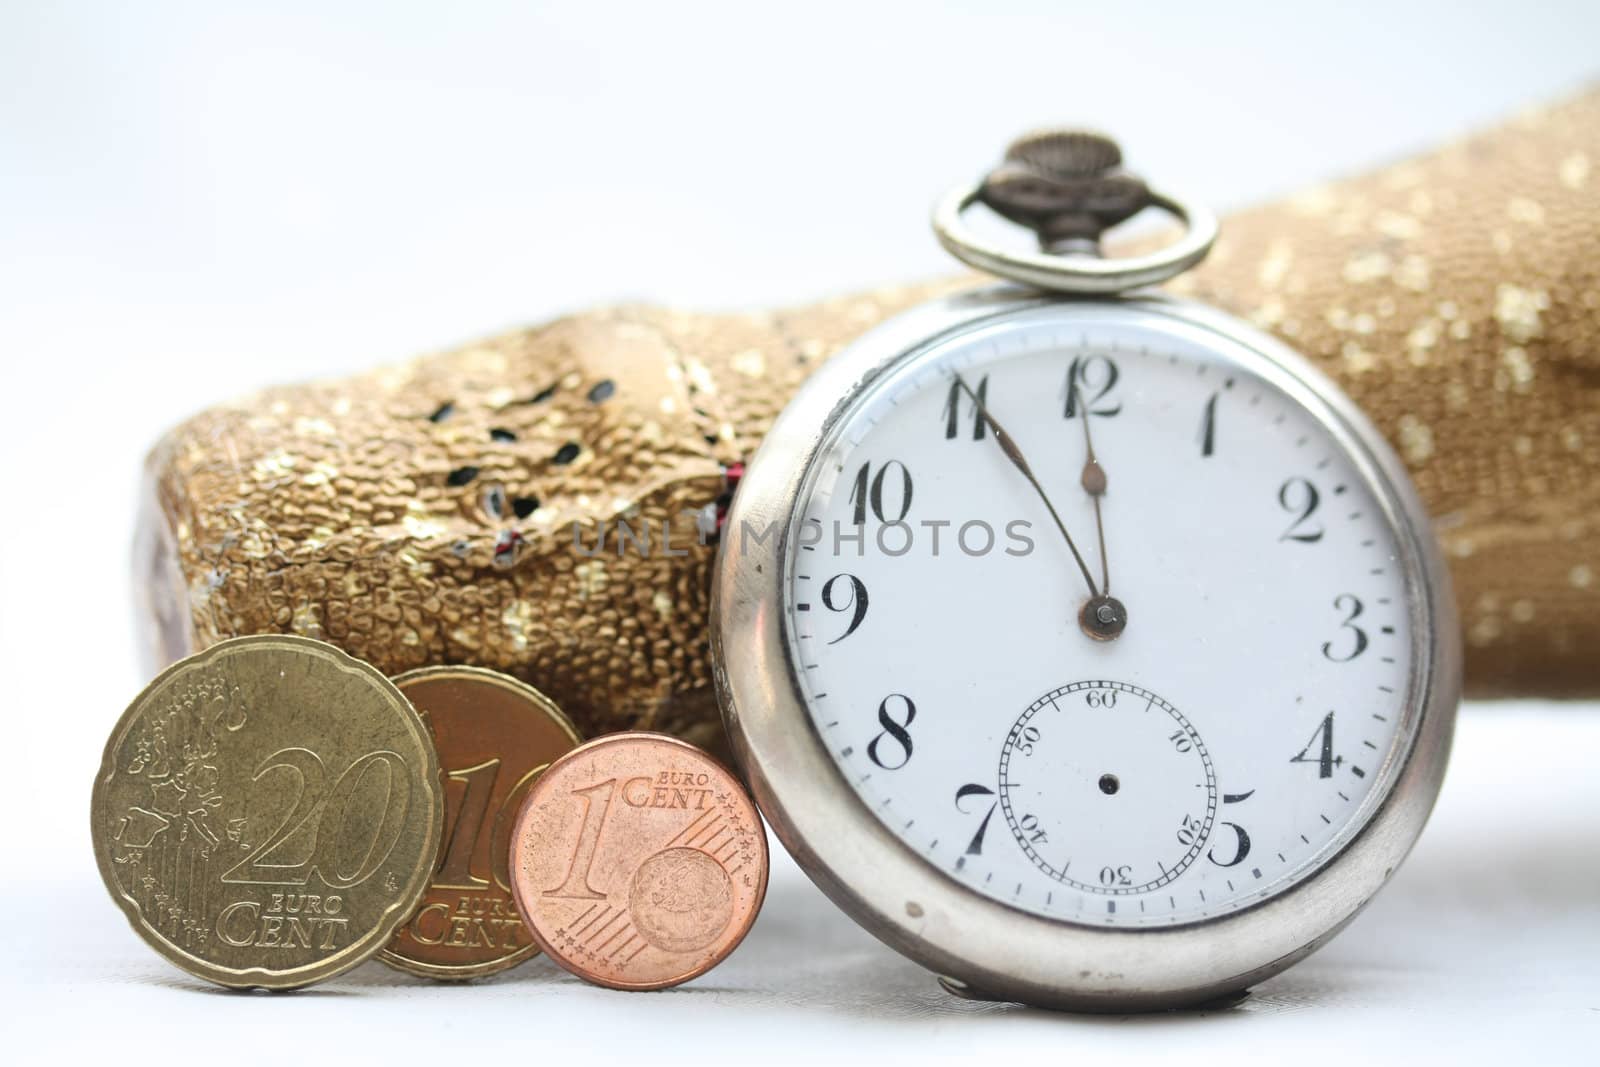 A champagne bottle, a vintage pocket watch and three euro coins making 2011. Perfect New Years greeting card